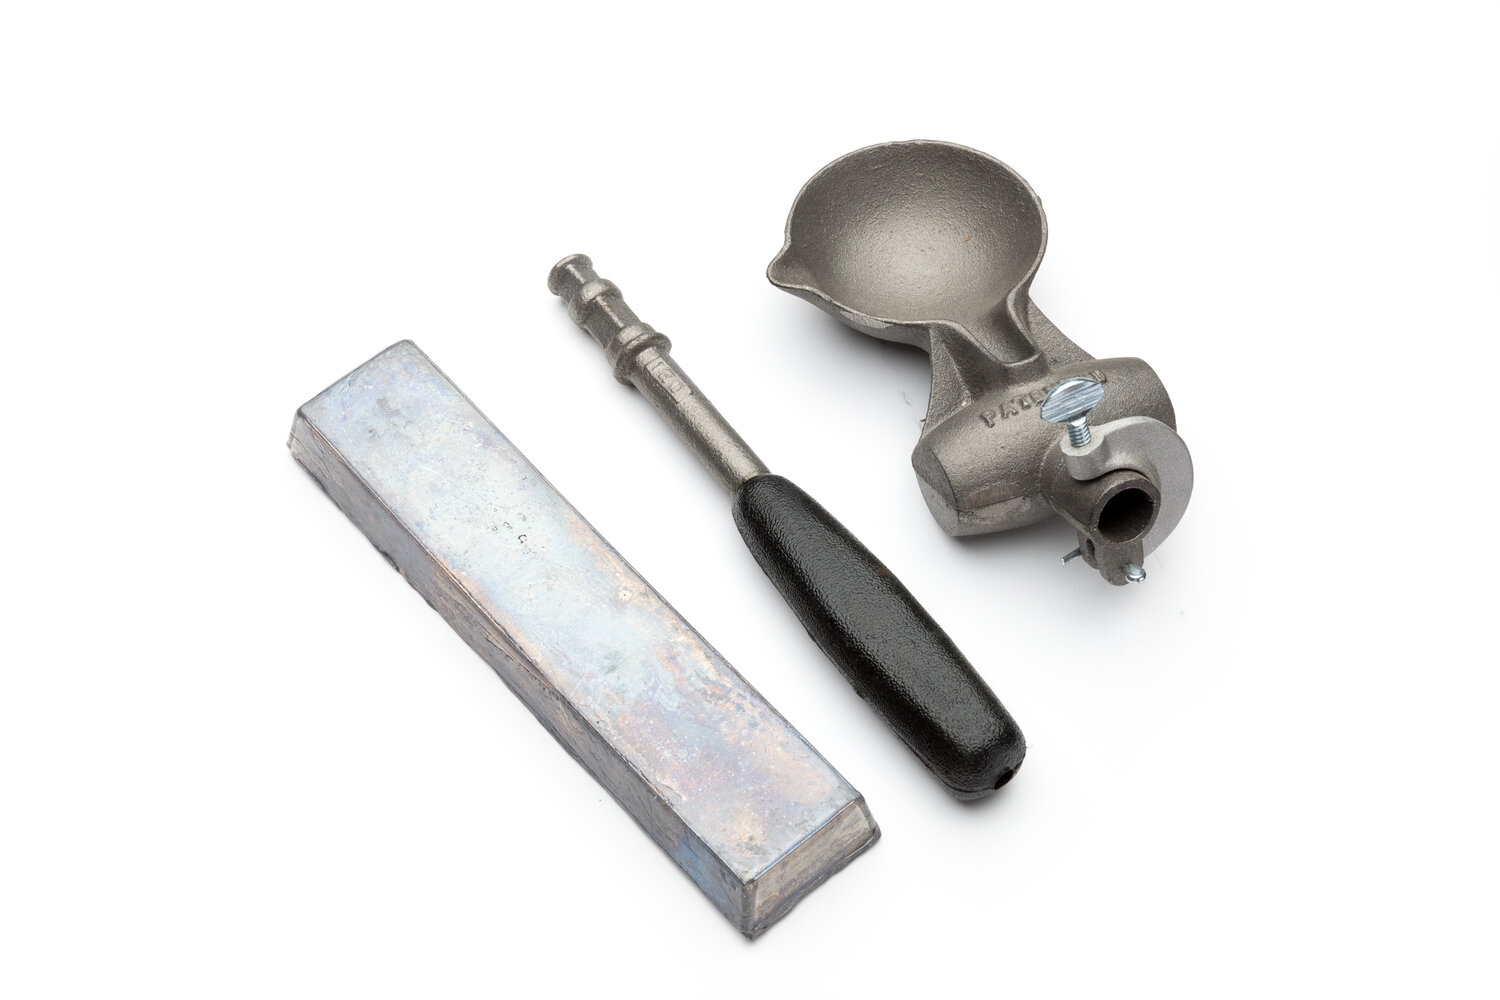 Lead Hammer Mold Set 5 Pound Perfect For General Non-Marring Hammer Work USA